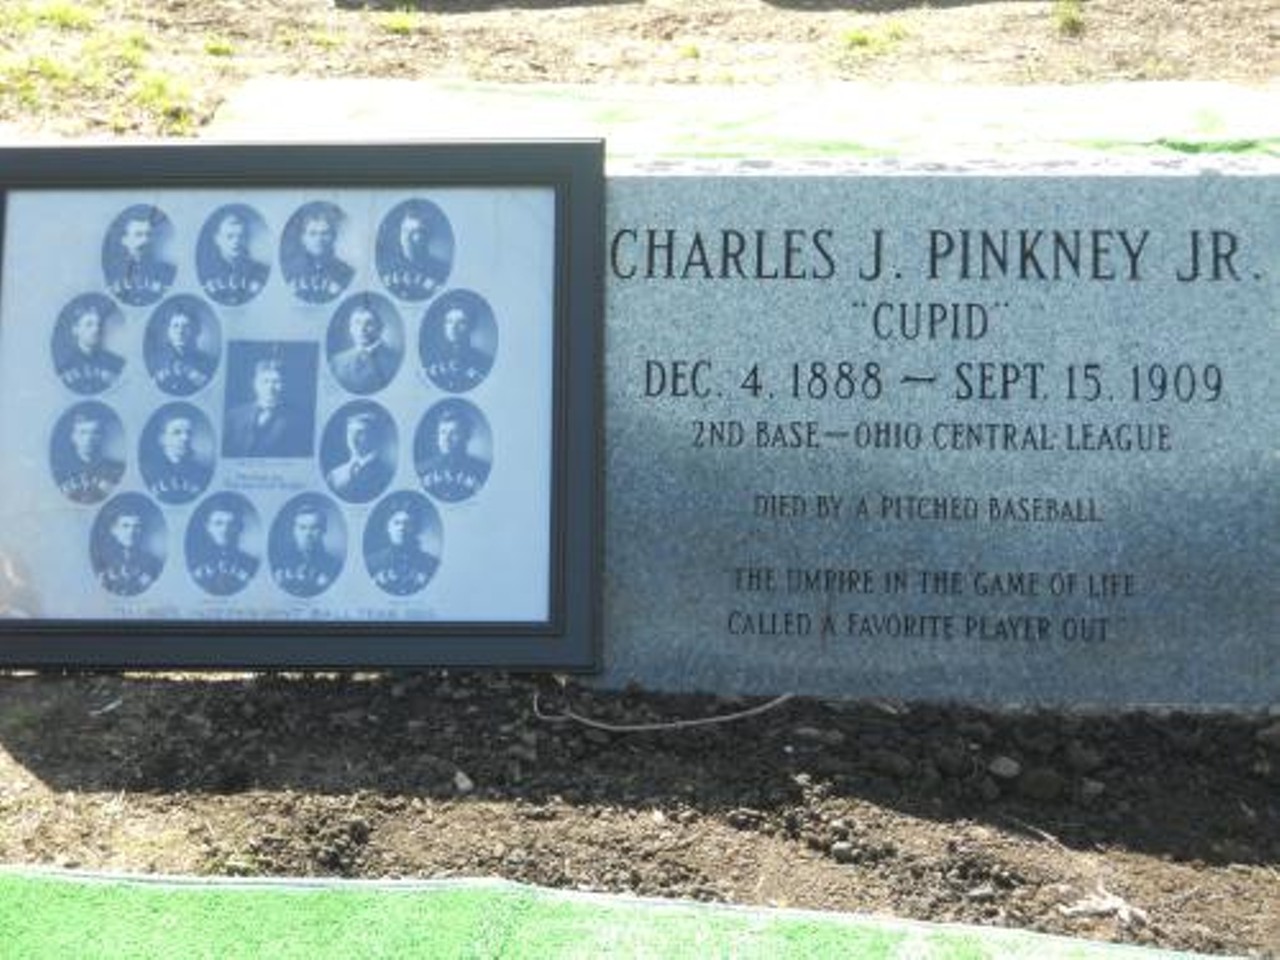 Charles J. "Cupid" Pinkney (1888-1909) - Lakeview Cemetery 
Charles is another baseball player to die from being hit by a pitch, but he never made the majors. Cupid played second base for the Ohio Central League and was a reported fan favorite.